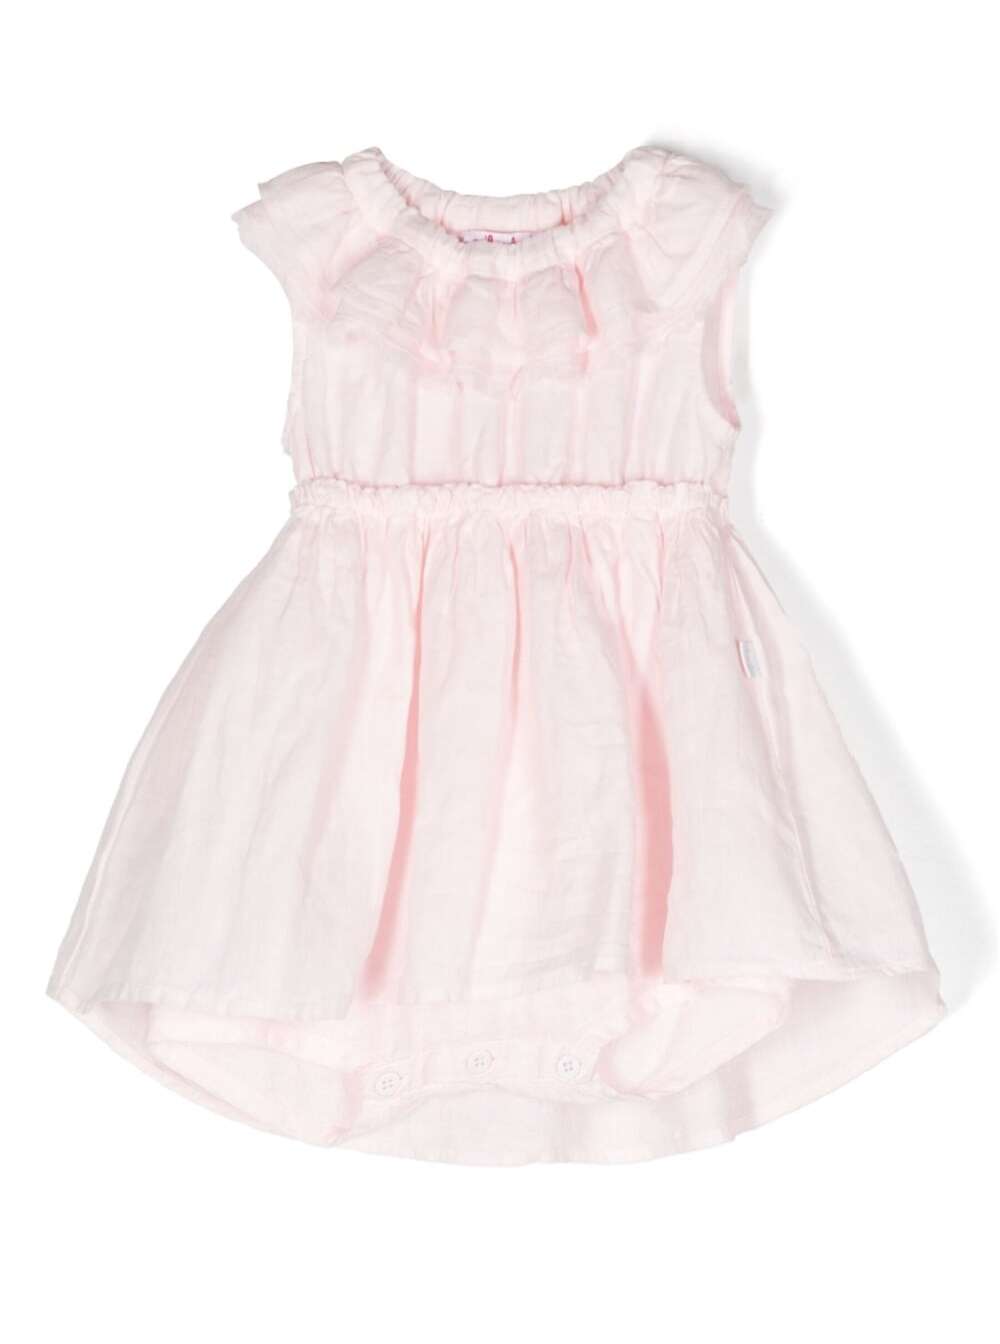 IL GUFO LIGHT PINK SLEEVELESS DRESS WITH RUFFLES AND FLARED SKIRT IN LINEN BABY